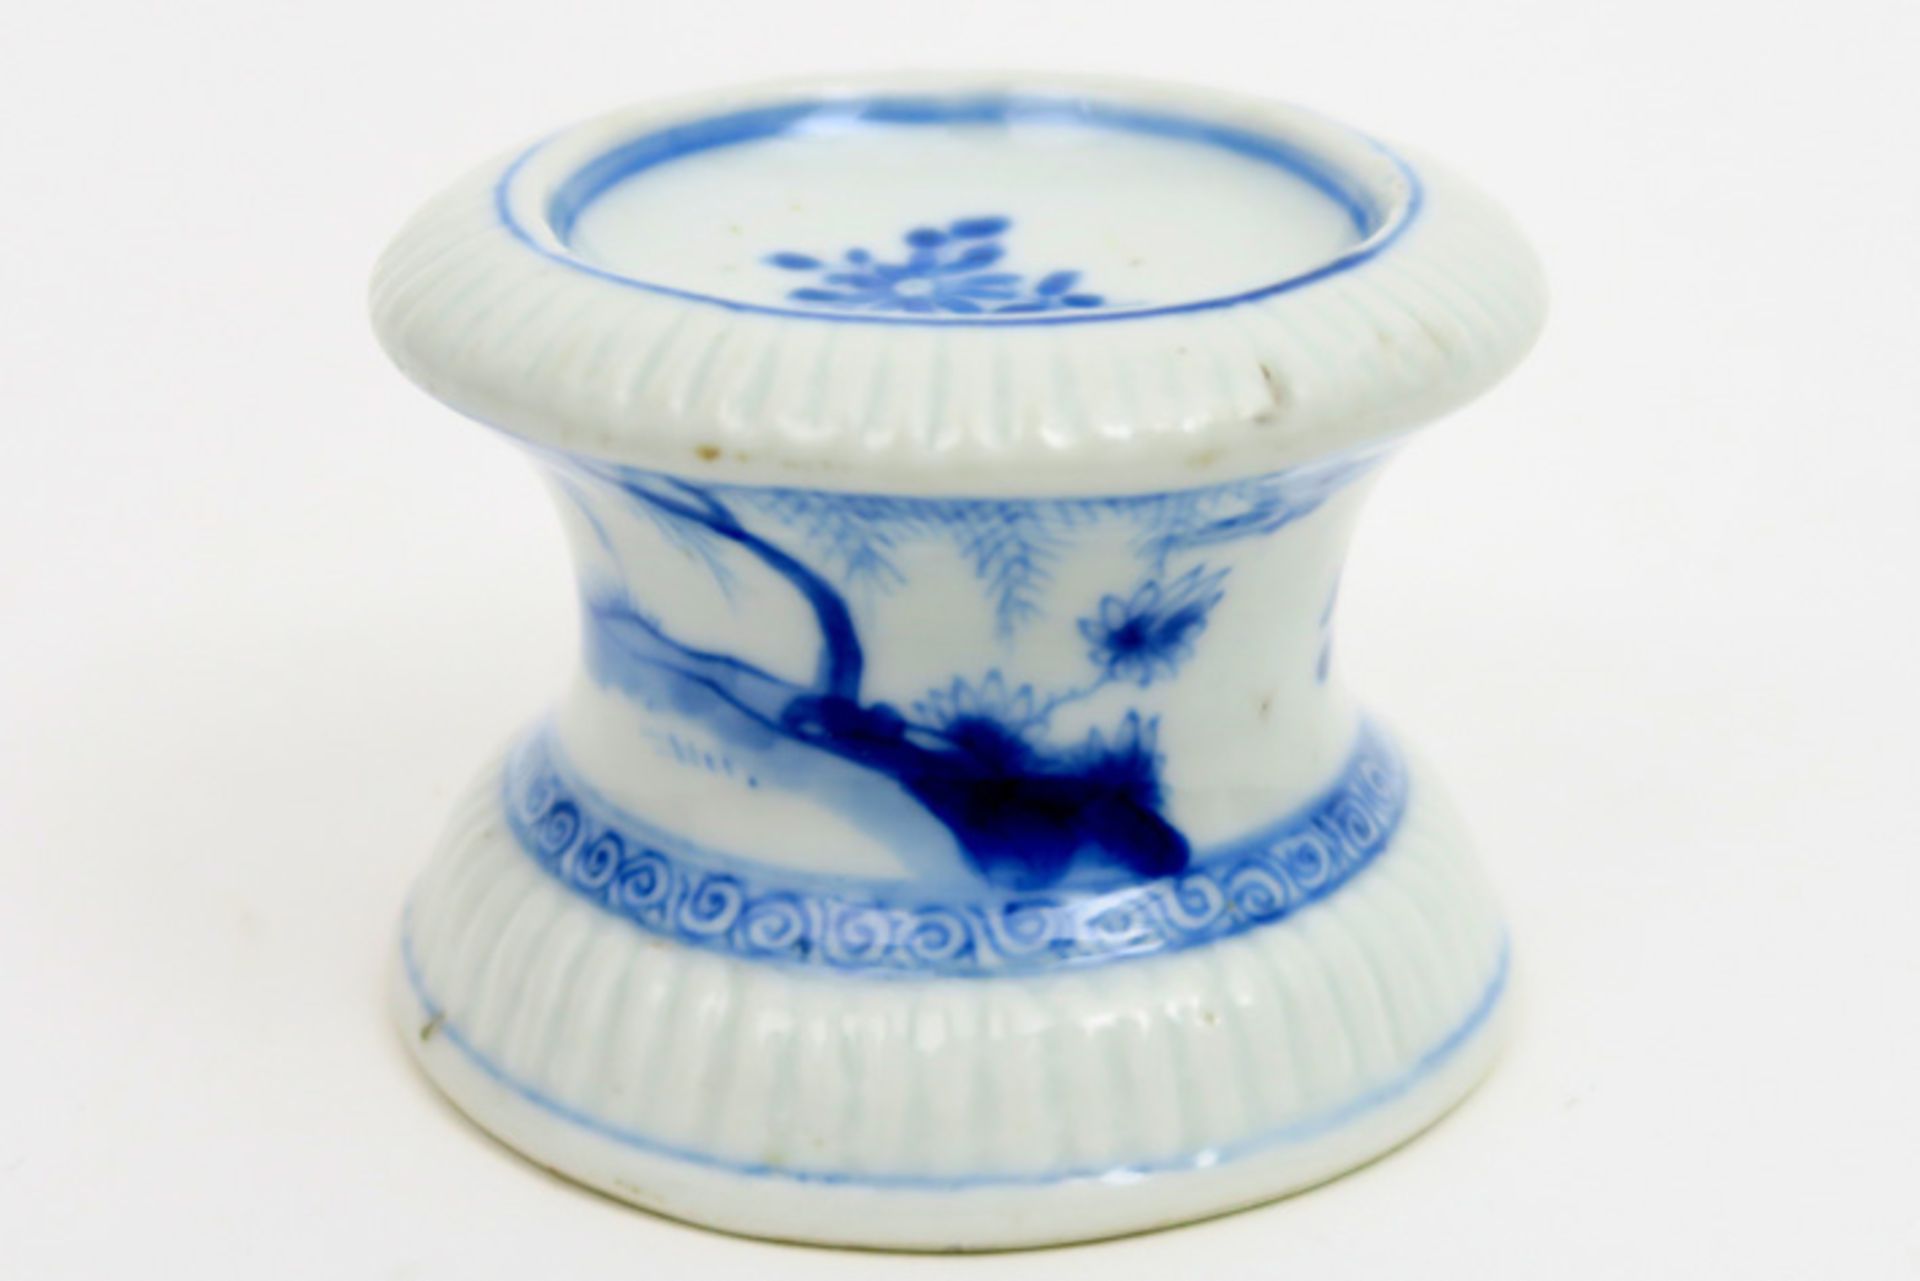 18th Cent. Chinese salt cellar in porcelain with blue-white decor with figures in a landscape